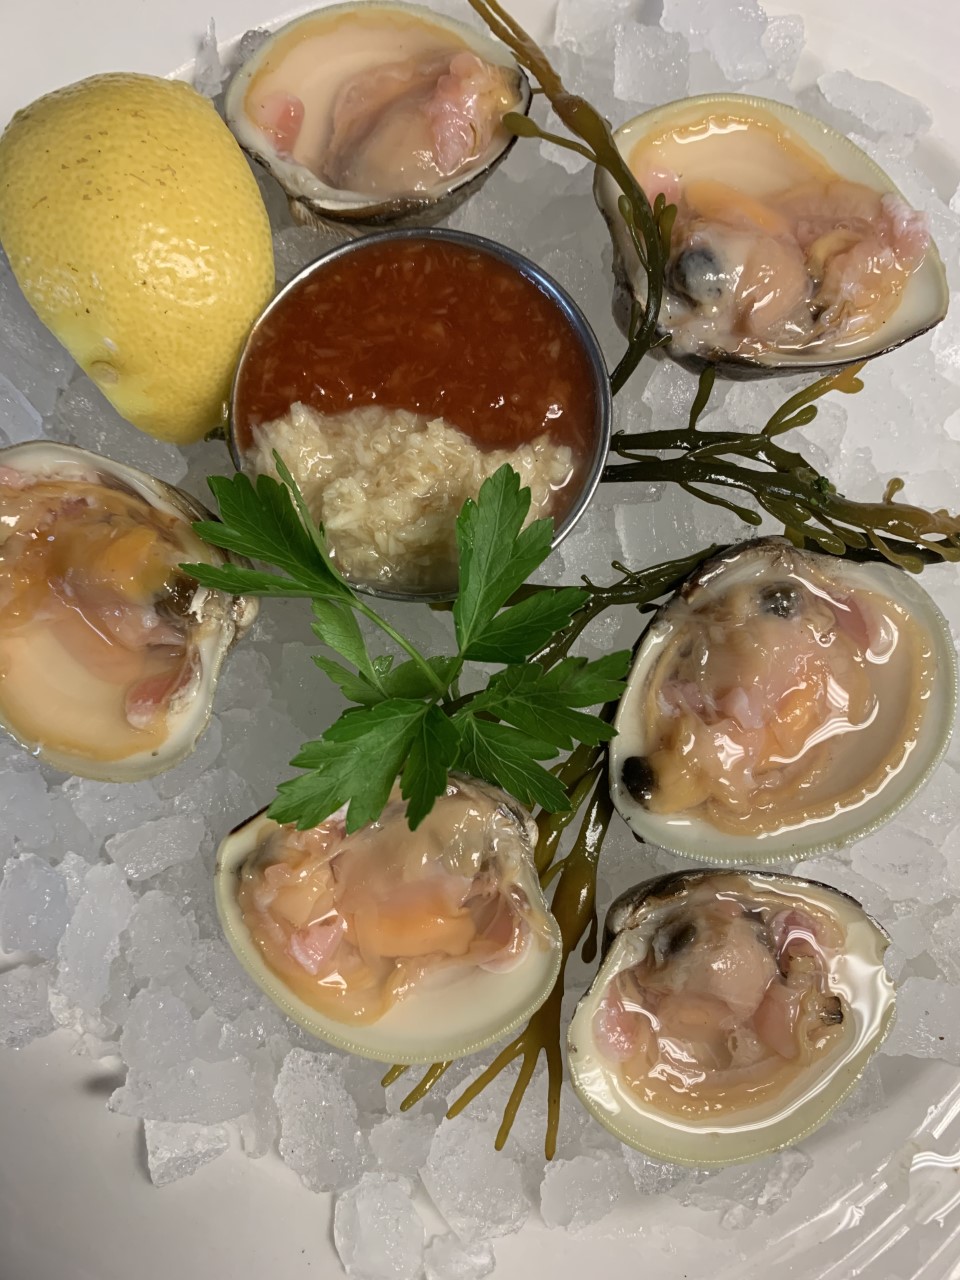 Six Little Neck Clams with horseradish and cocktail sauce garnished with a wedge of lemon all over ice